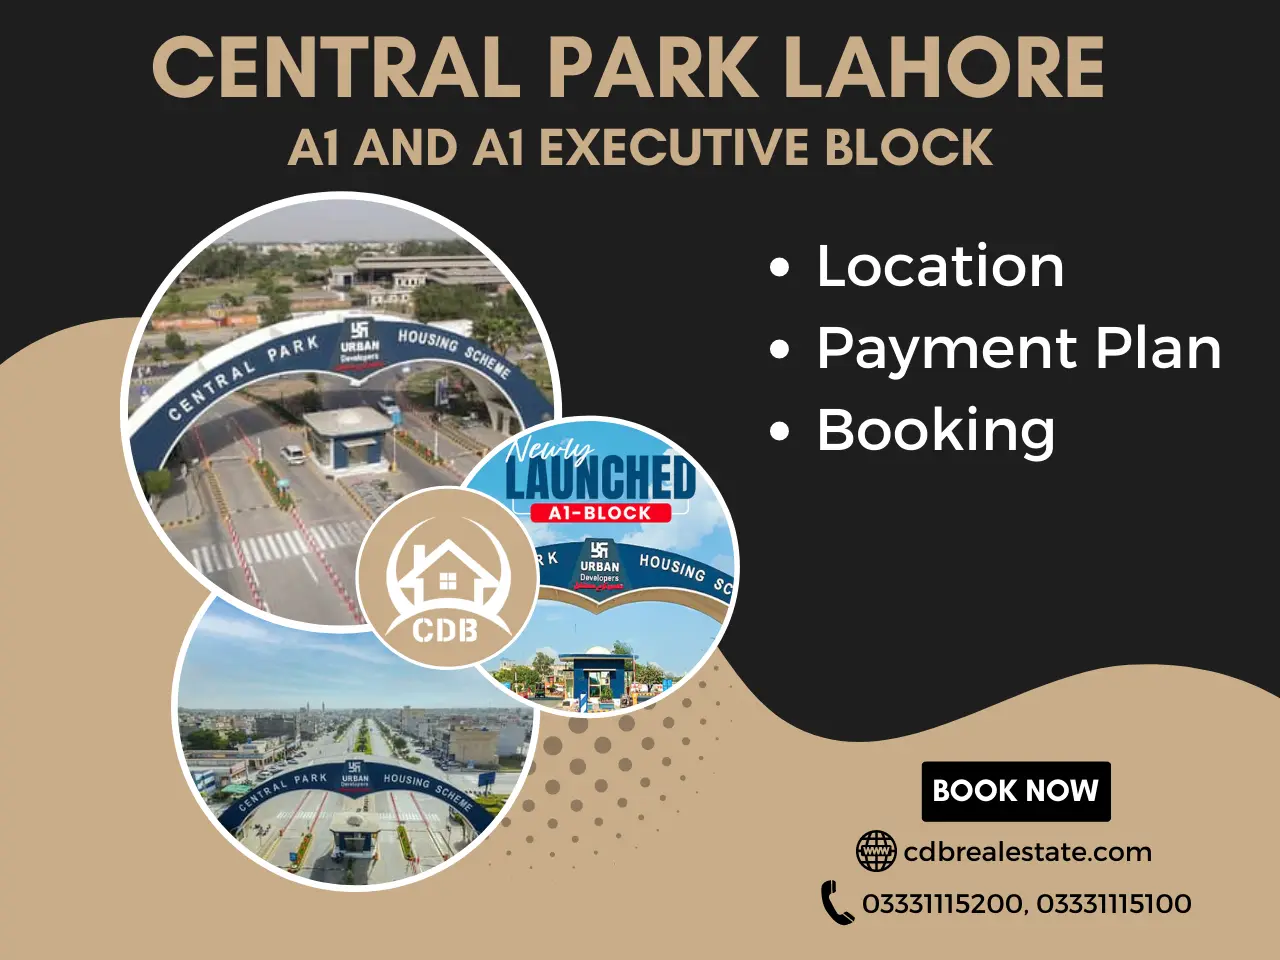 Central Park Lahore A1 and A1 Executive Block